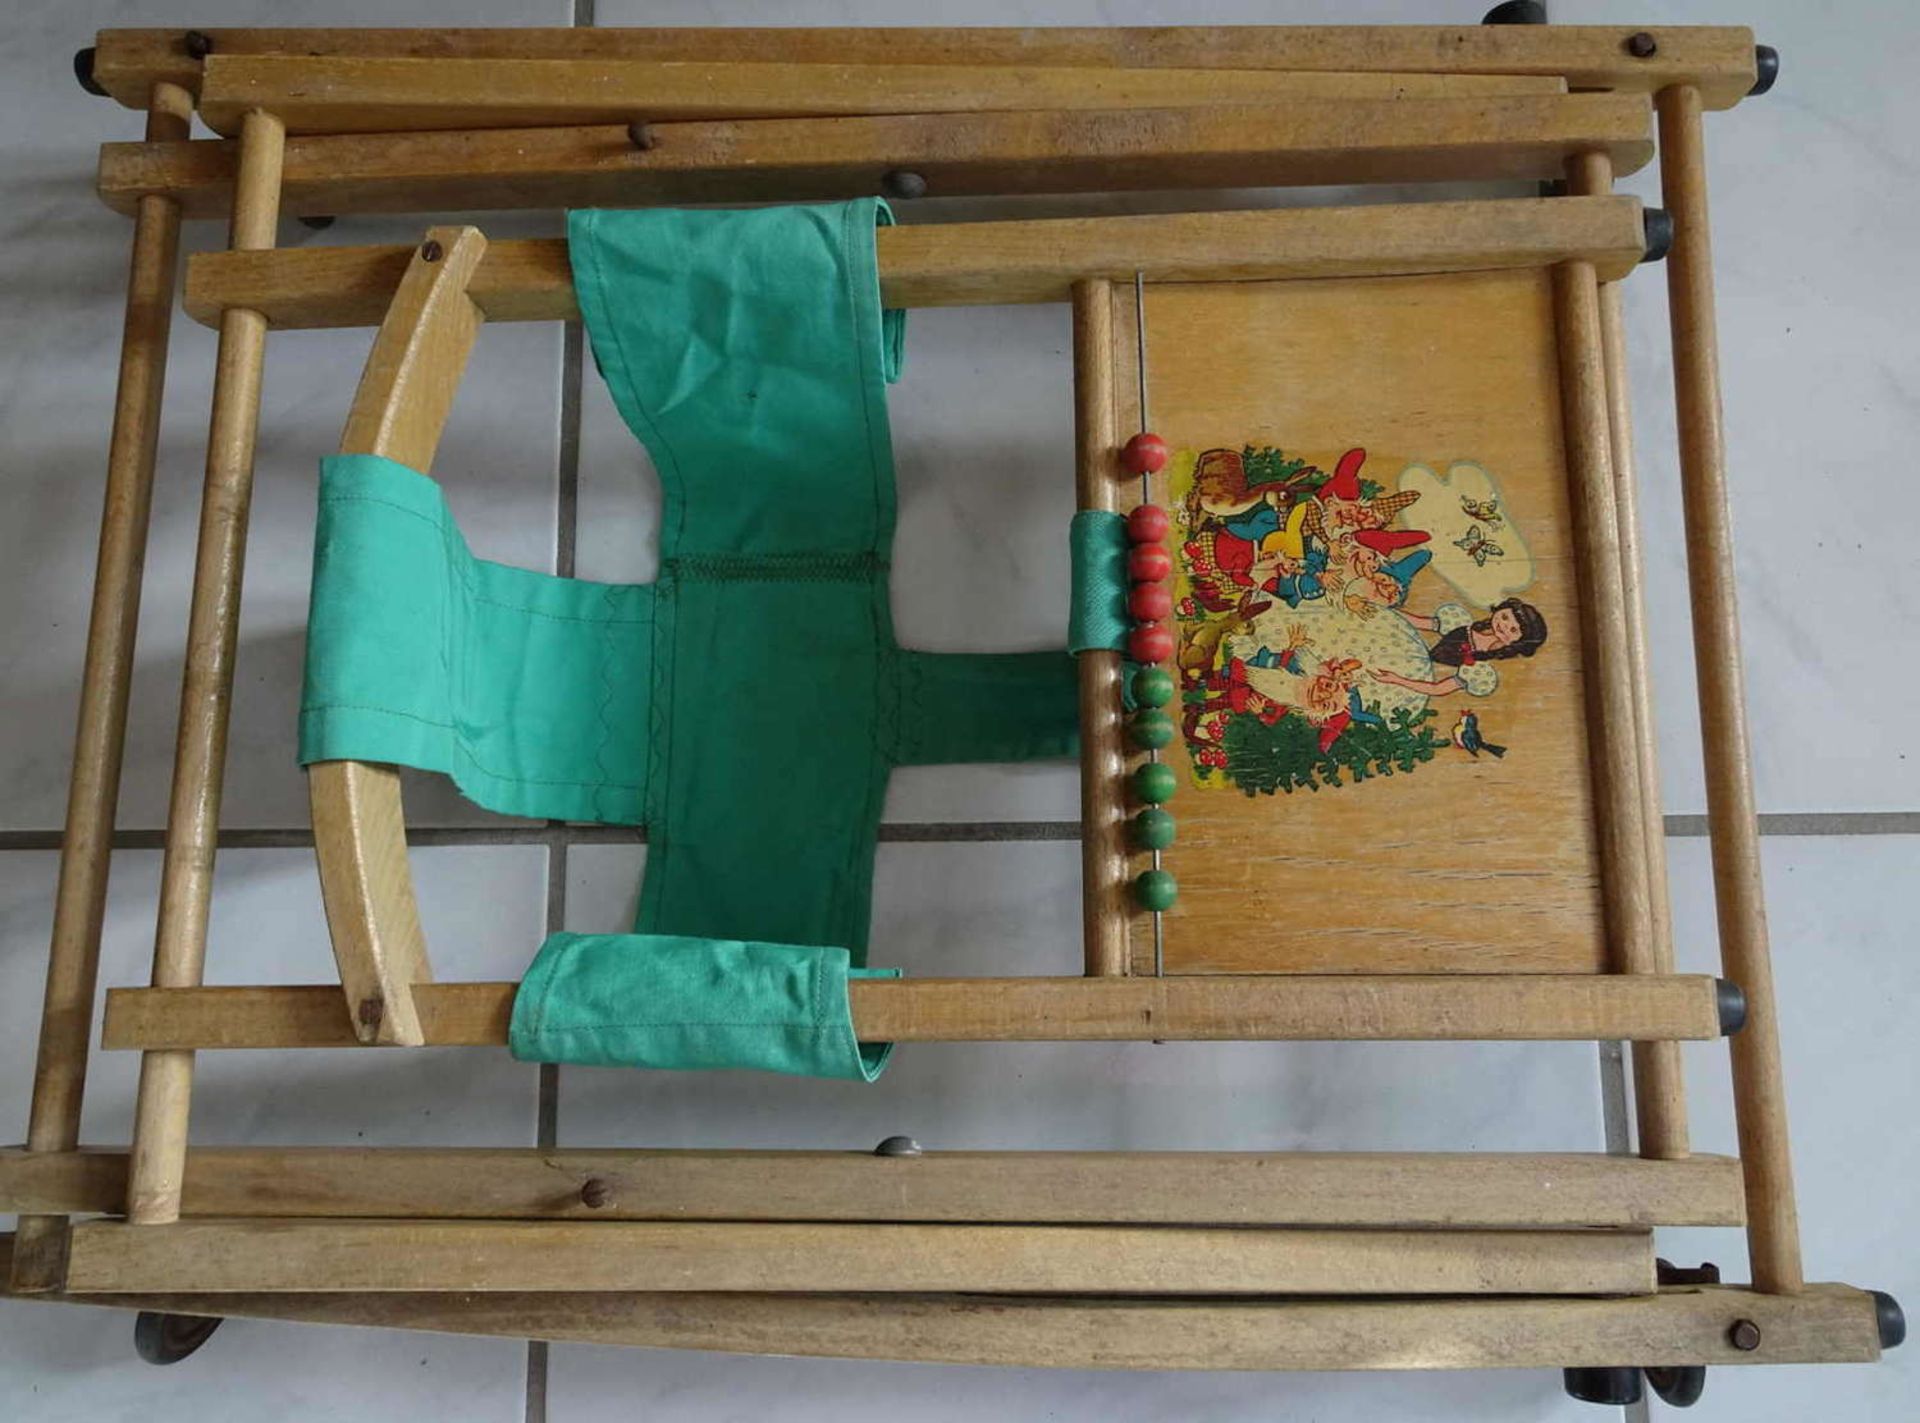 Wooden walker with snow white motif, collapsible. Approximately 50s-60s.